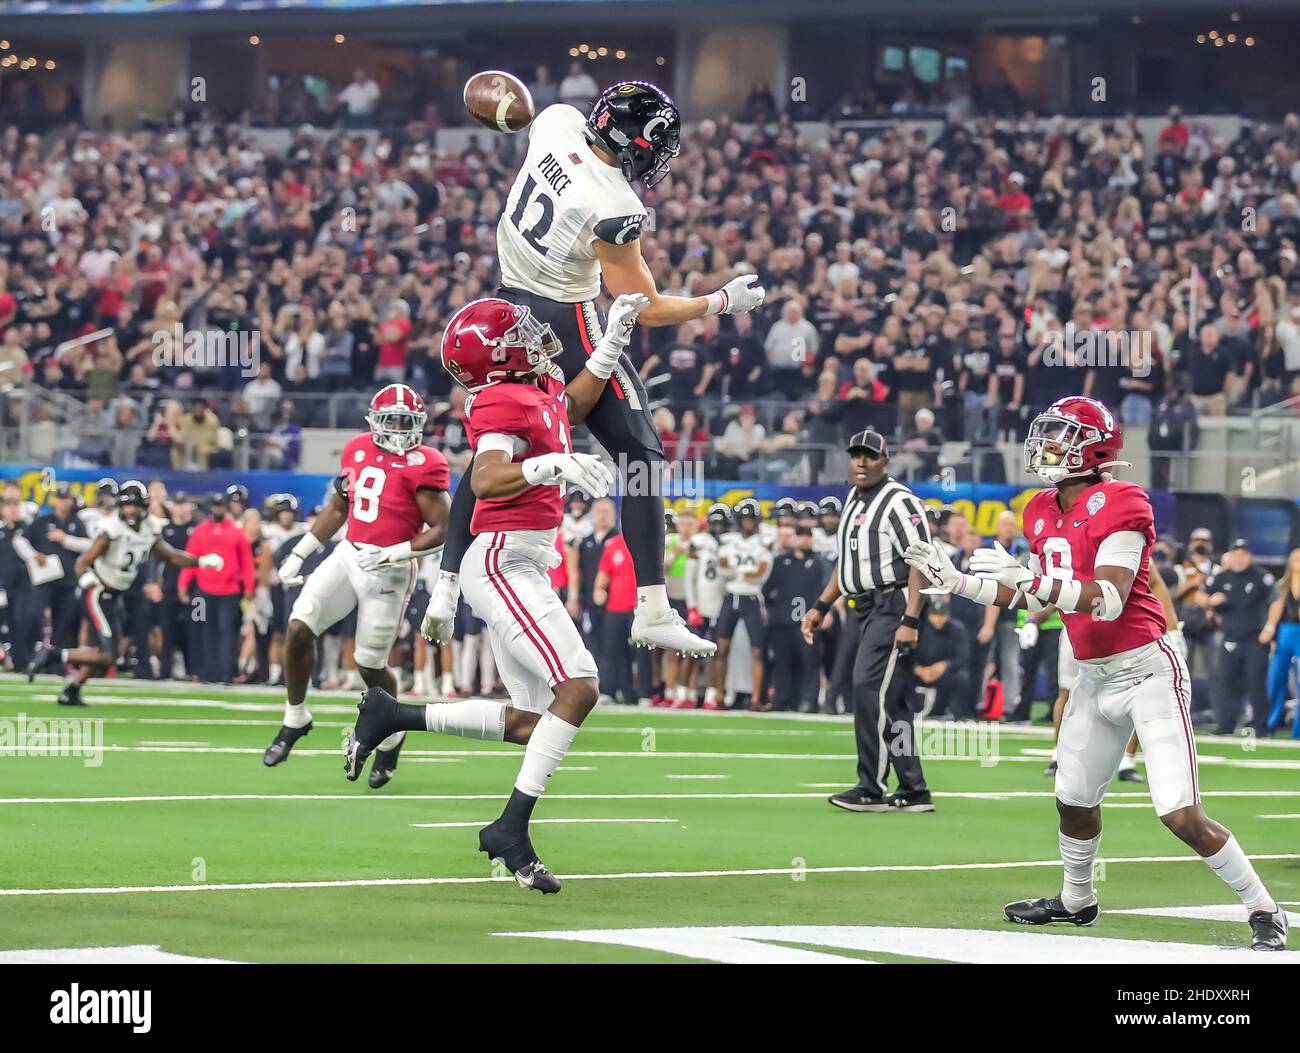 December 31, 2021: Cincinnati Bearcats wide receiver Alec Pierce (12) narrowly misses a touchdown pass during the Cotton Bowl Classic NCAA Football game between the University of Cincinnati Bearcats and the University of Alabama Crimson Tide at AT&T Stadium in Arlington, Texas. Tom Sooter/Dave Campbells Texas Football via CSM. Stock Photo